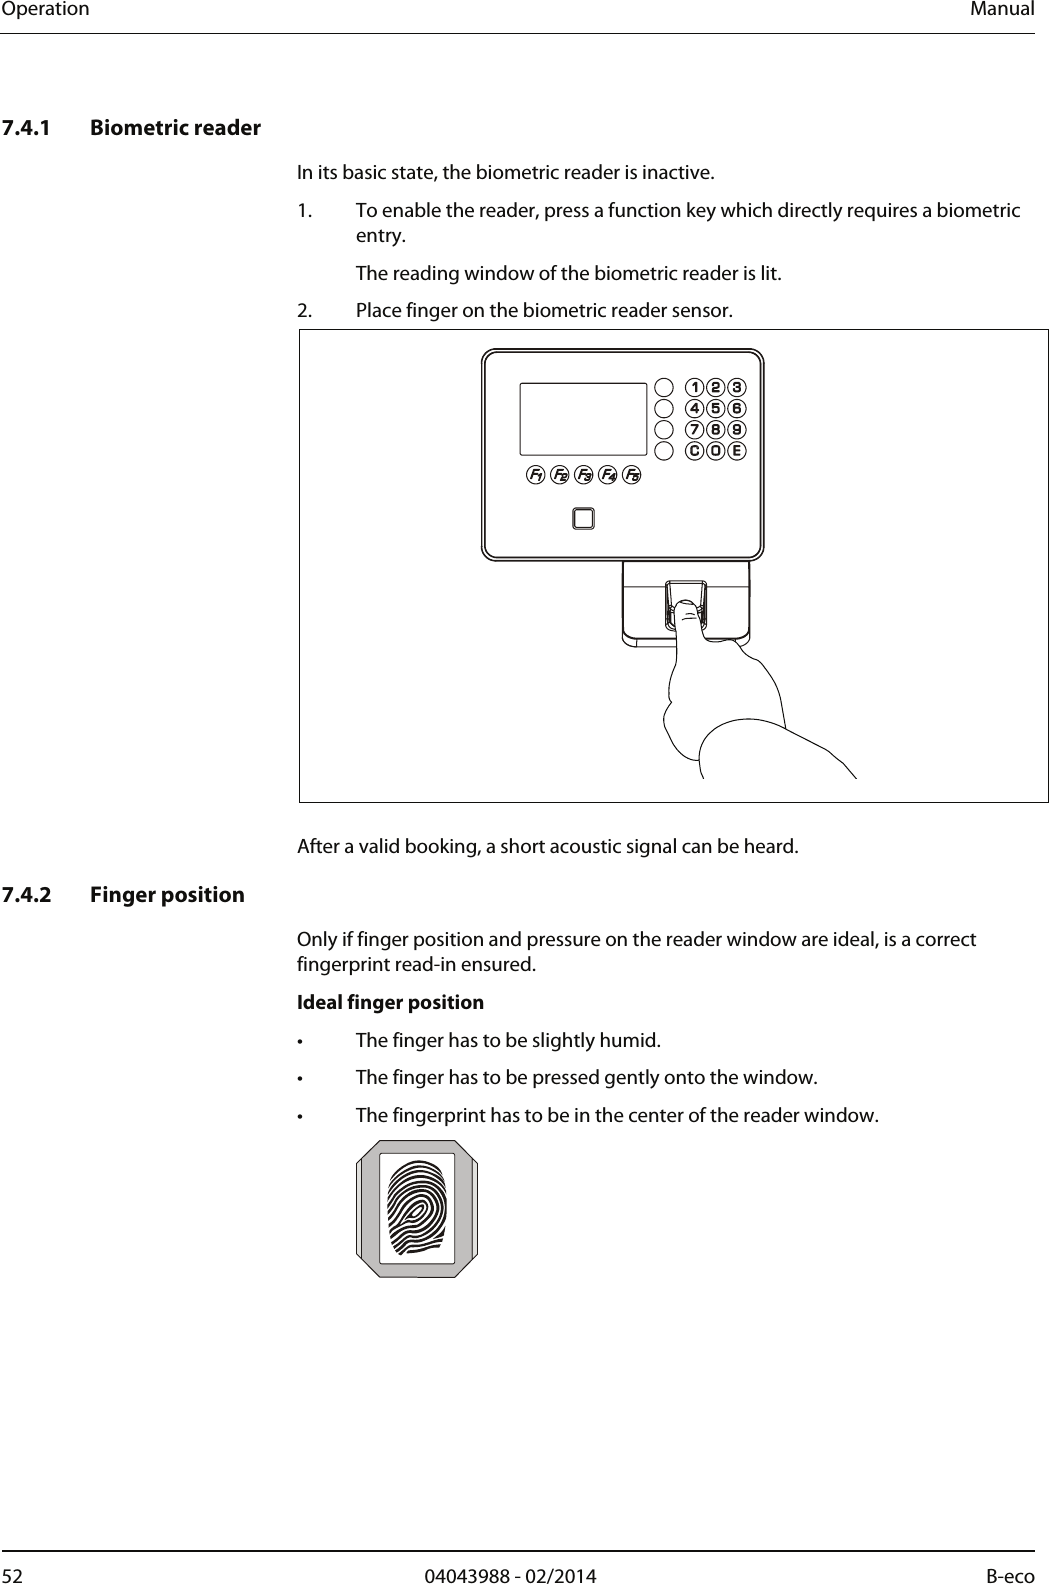 Operation  Manual 52  04043988 - 02/2014  B-eco    7.4.1 Biometric reader In its basic state, the biometric reader is inactive. 1. To enable the reader, press a function key which directly requires a biometric entry.   The reading window of the biometric reader is lit. 2. Place finger on the biometric reader sensor.   After a valid booking, a short acoustic signal can be heard.  7.4.2 Finger position Only if finger position and pressure on the reader window are ideal, is a correct fingerprint read-in ensured. Ideal finger position •  The finger has to be slightly humid. •  The finger has to be pressed gently onto the window. •  The fingerprint has to be in the center of the reader window.   